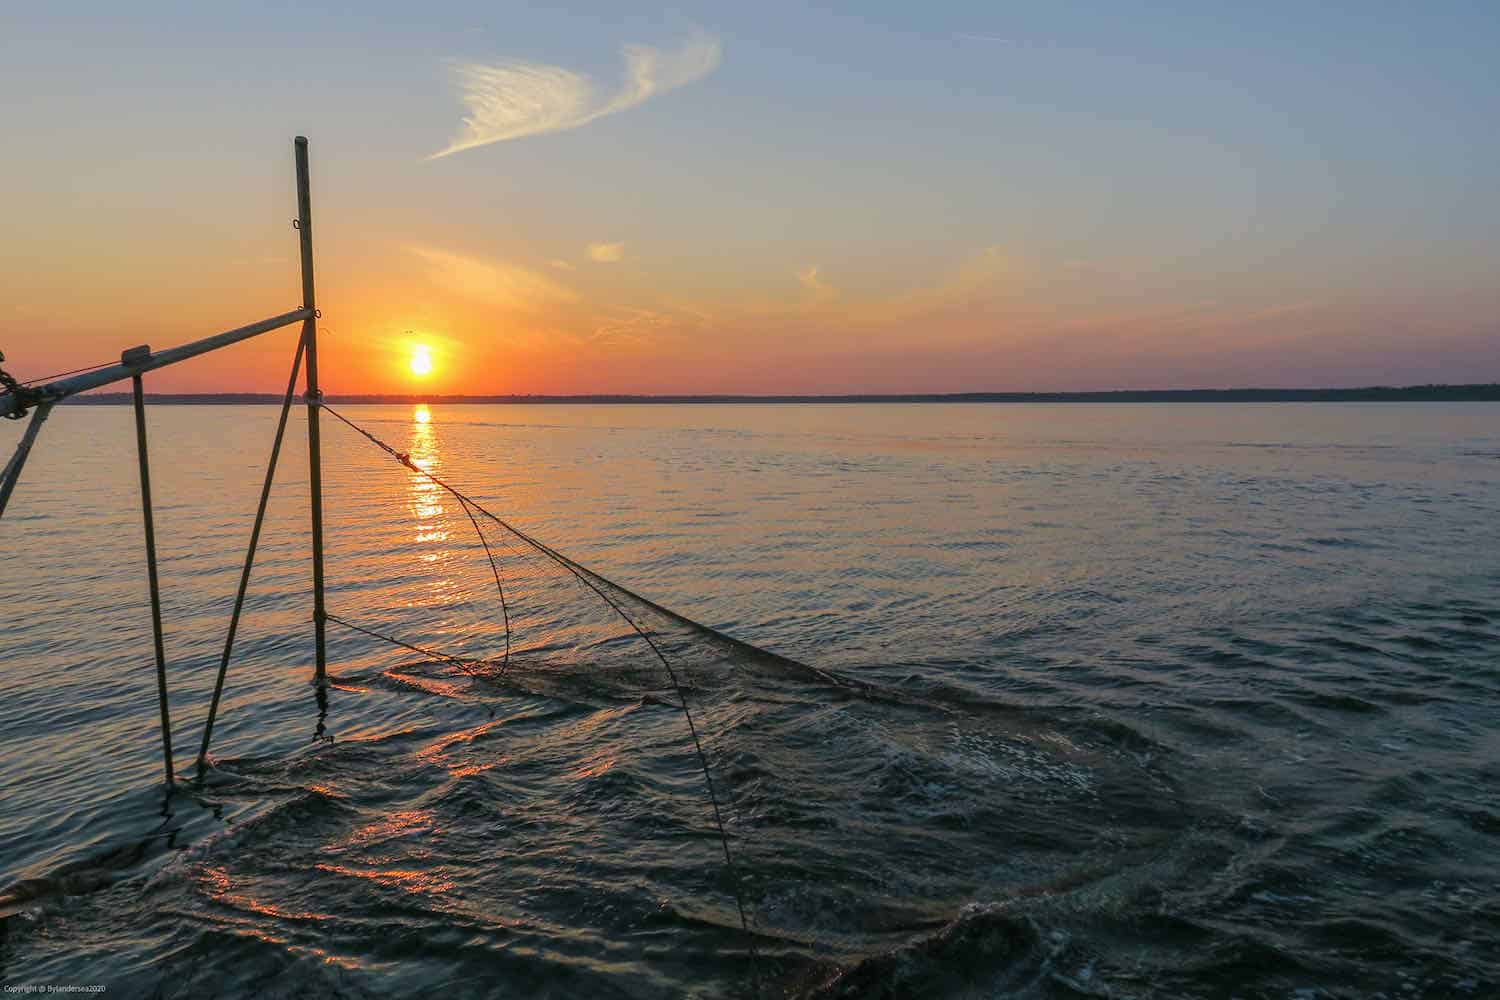 Sunset on the water while shrimping